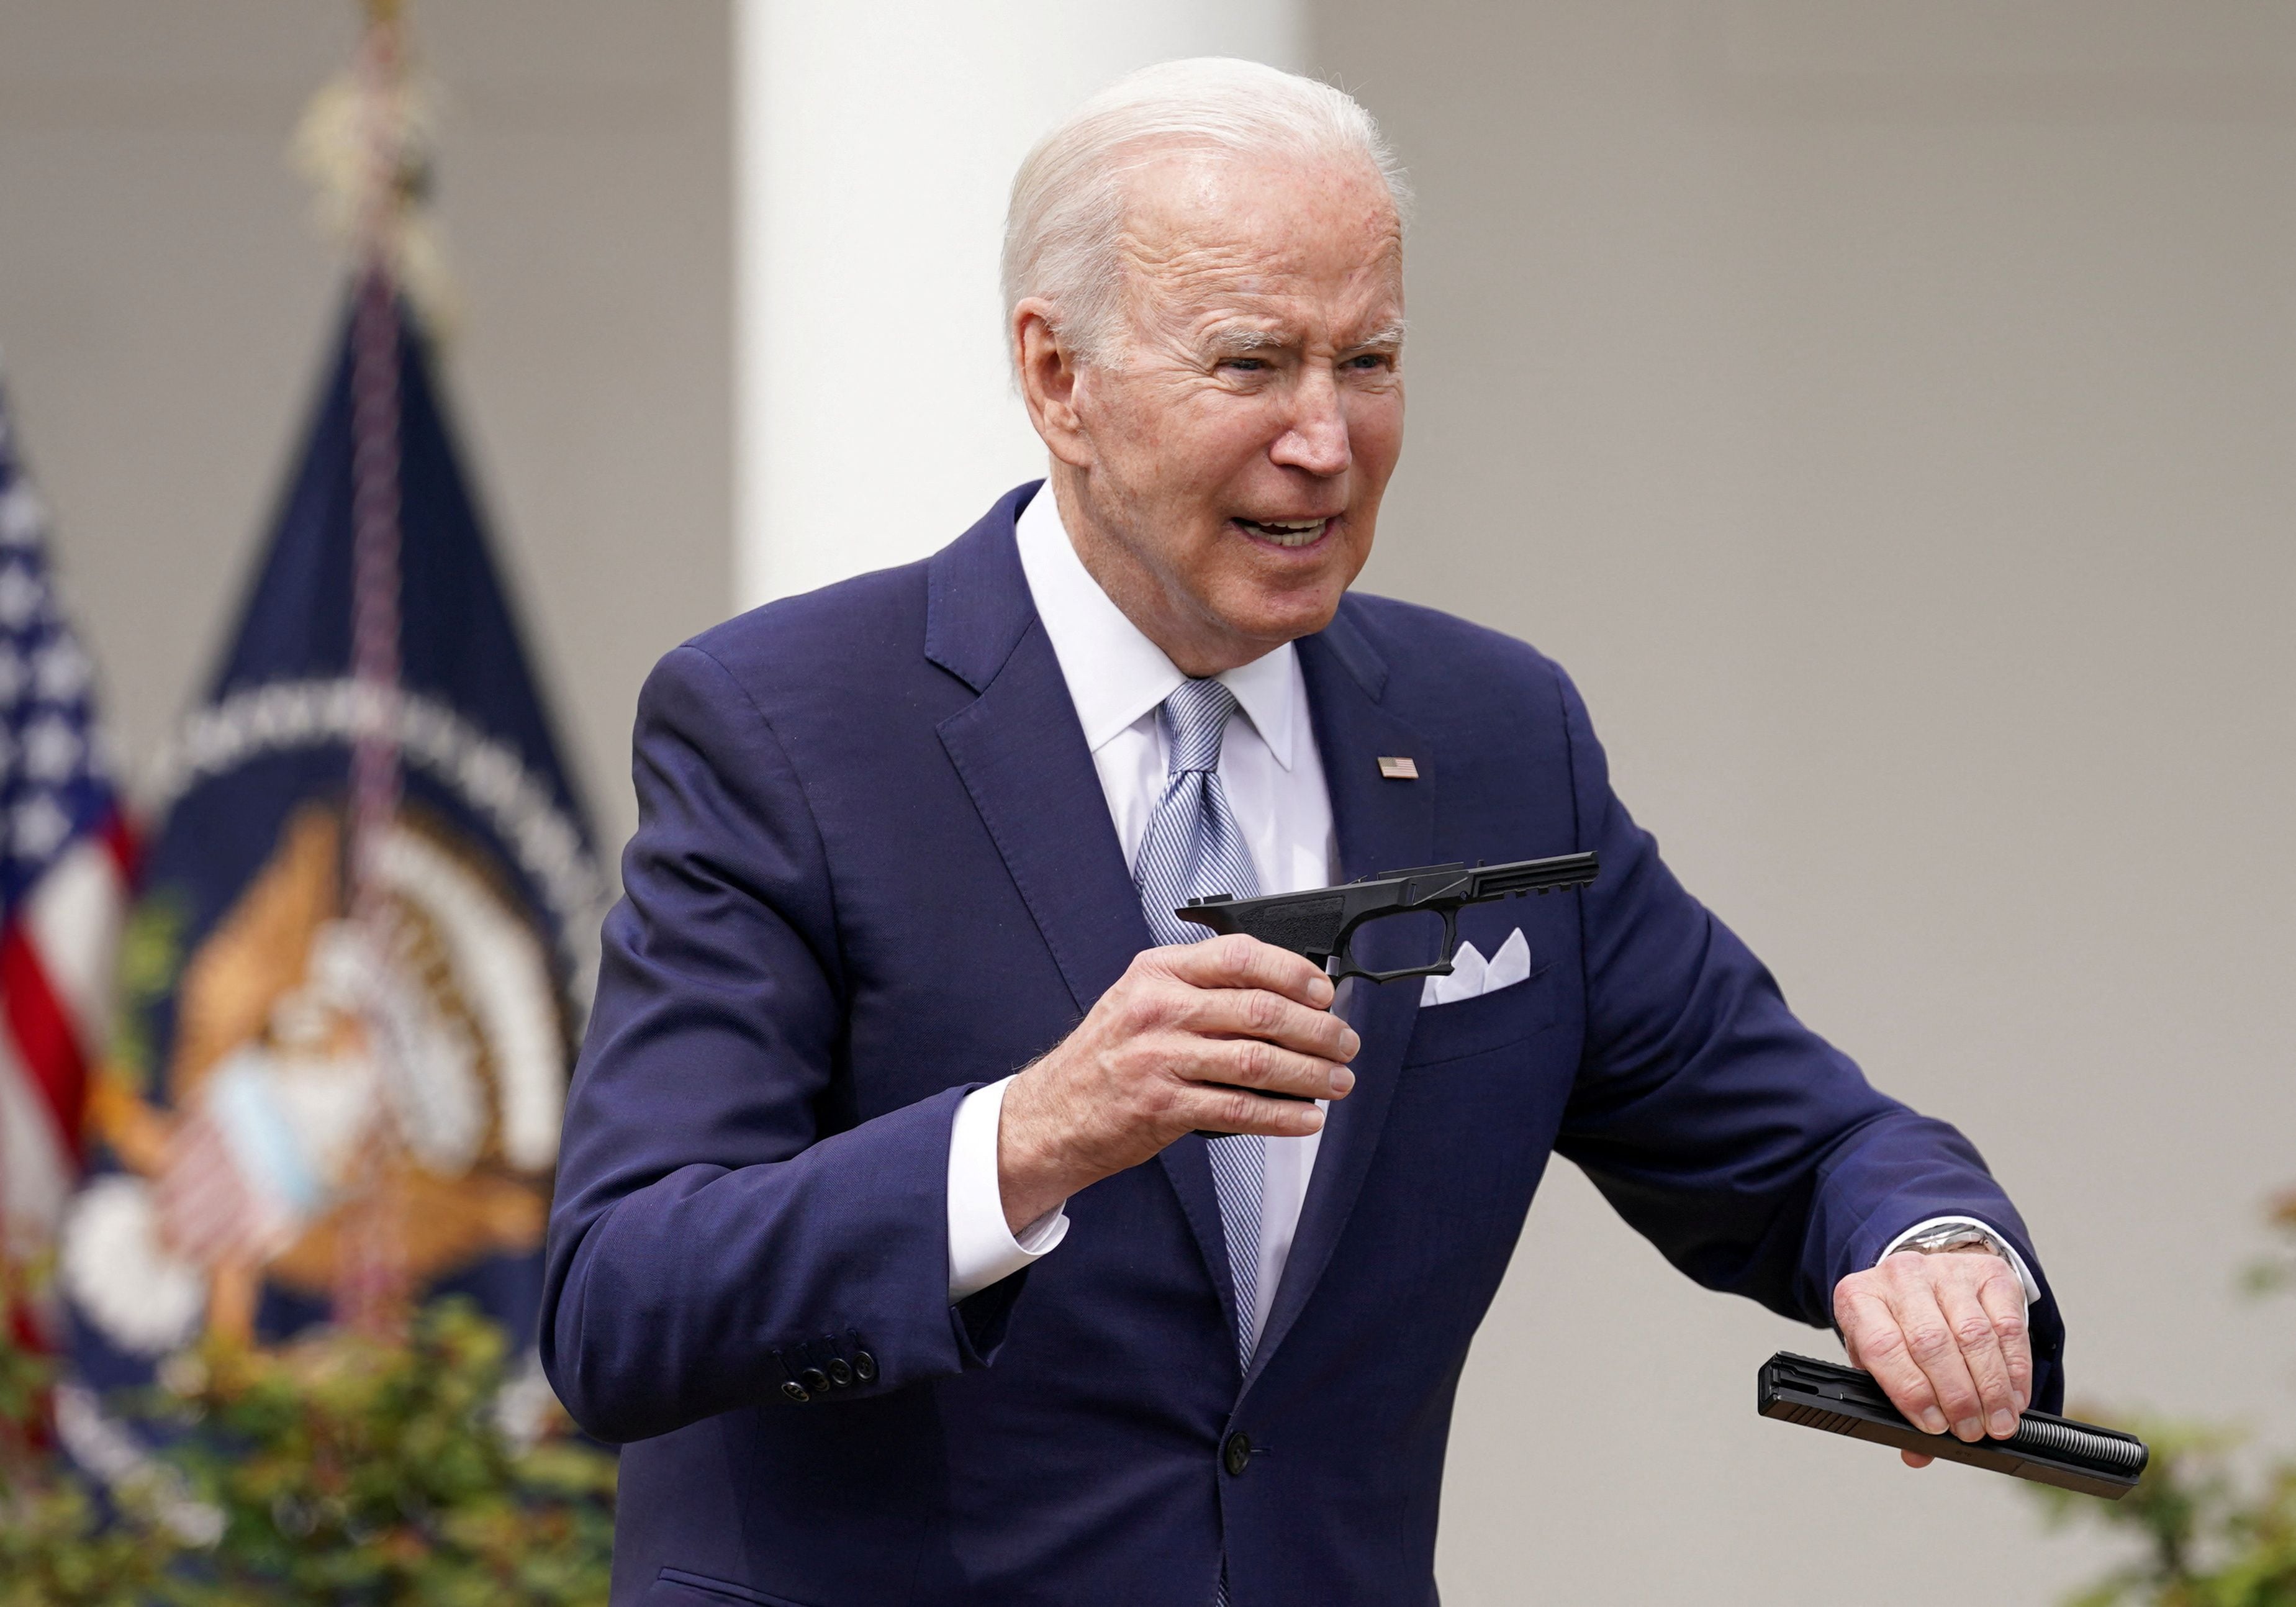 Biden's age has raised concerns about his ability to lead the next administration.  (Photo: REUTERS/Kevin Lamarque).